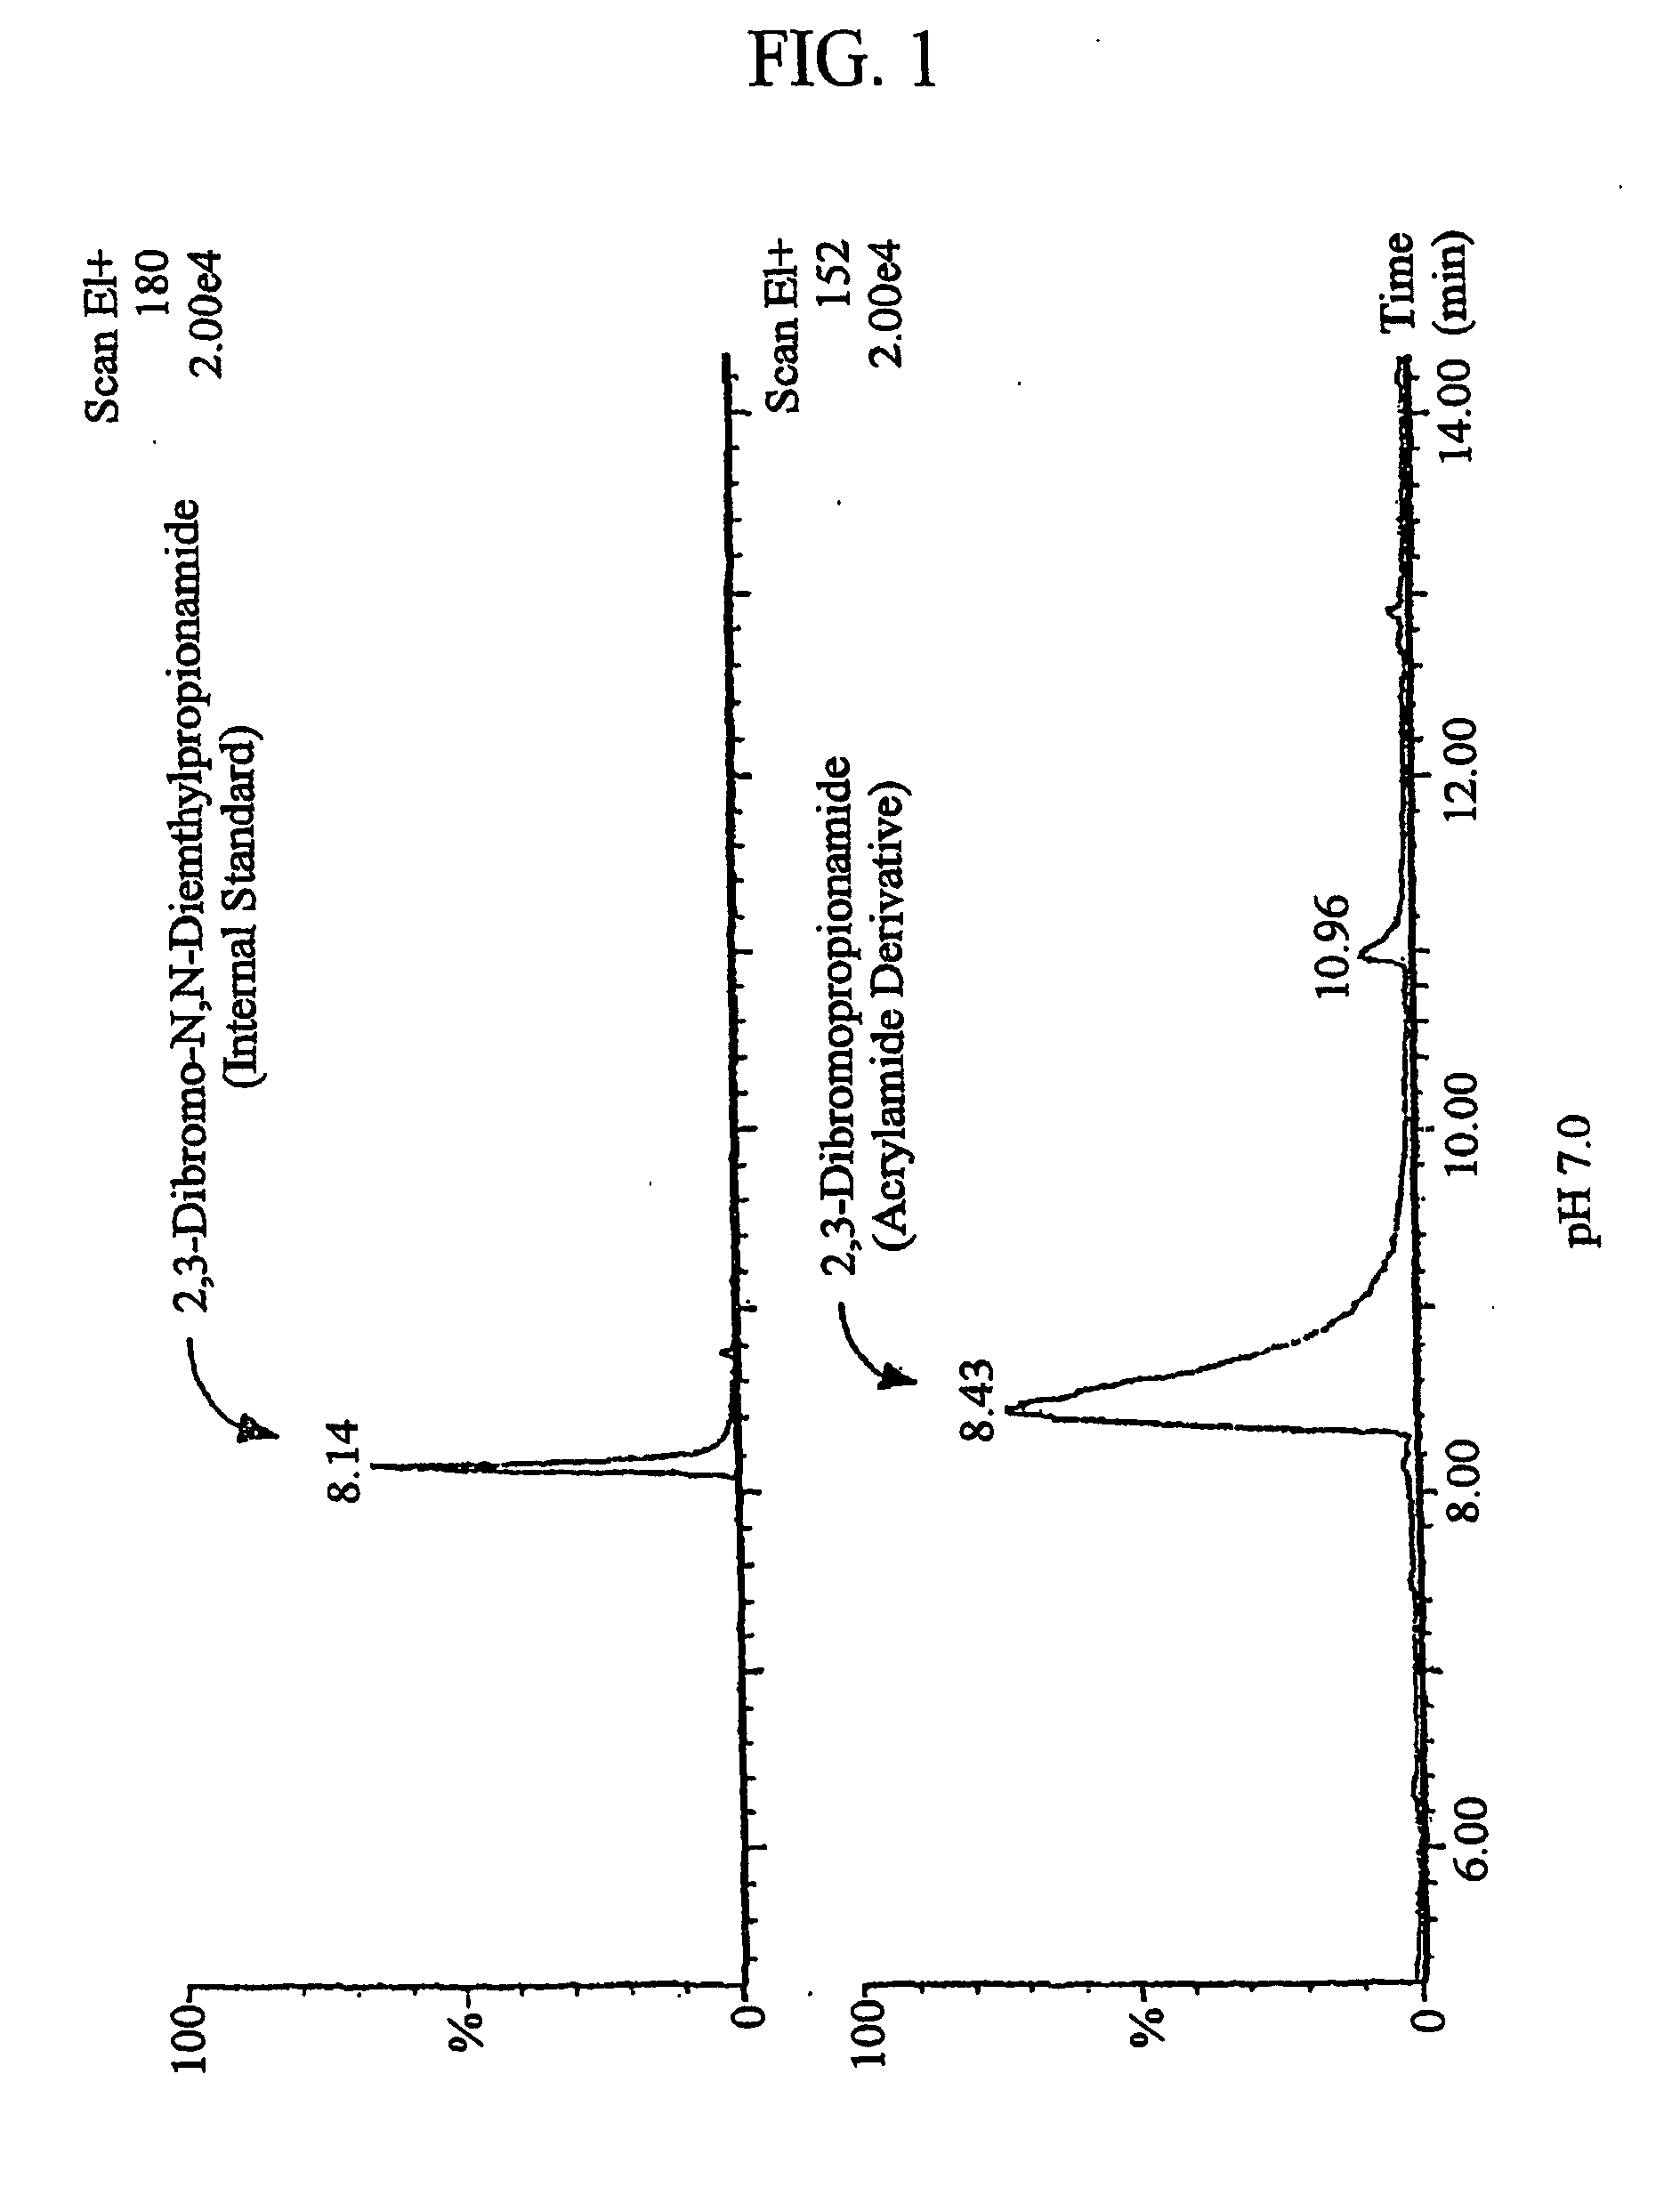 Method for the reduction of acrylamide formation